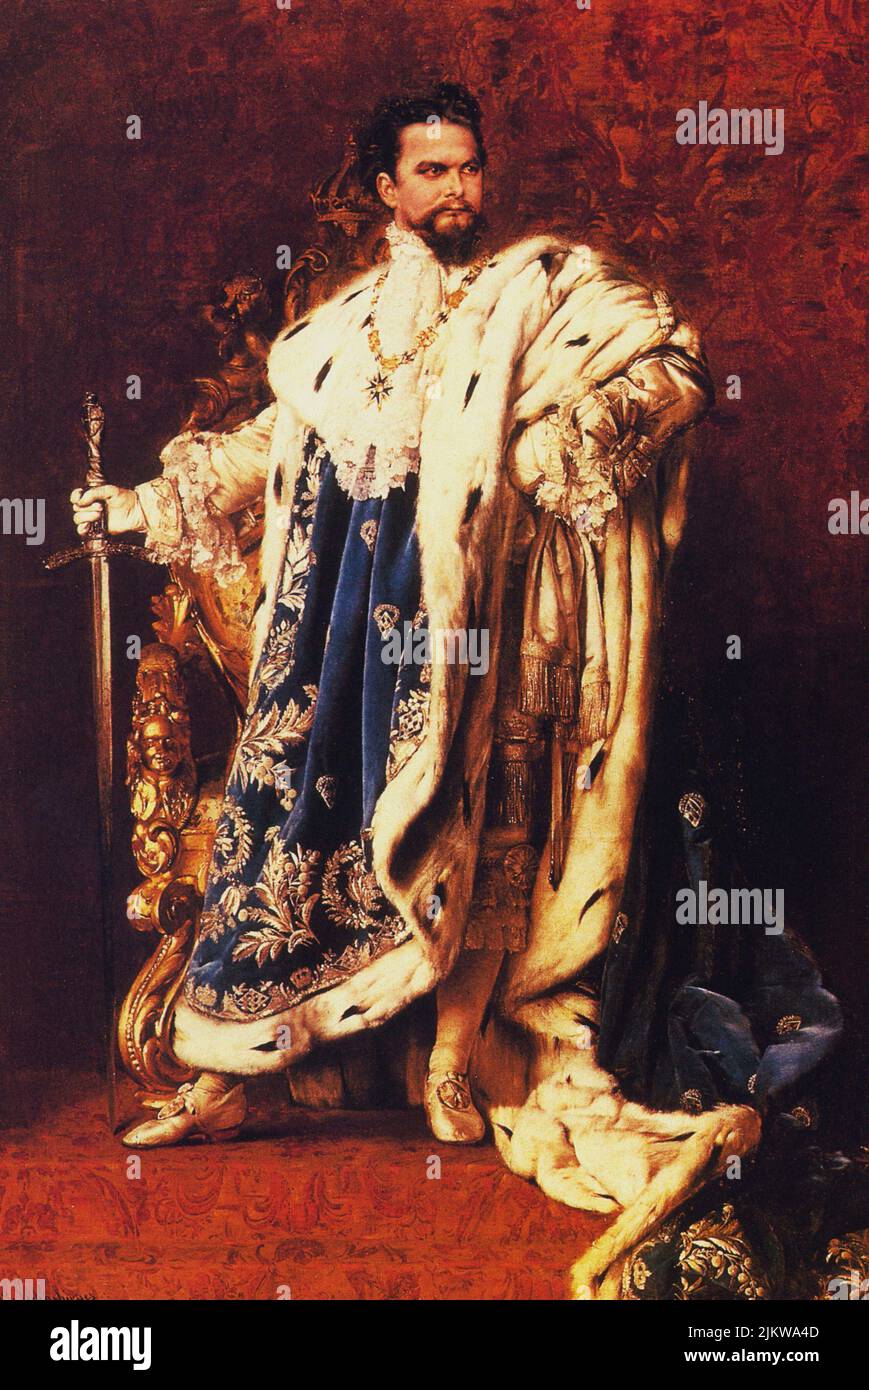 The mad and suicide king of Bayern LUDWIG II of Wittelsbach ( Nymphenburg 1845 - Starnberg 1886 ) from 1864 to 1886 , friend of Opera music composer Richard Wagner .  The portrait like Grand Master of The Royal Order of The Knights of Saint George , painting by GEORG  SCHACHINGER   ( 1887 )  - RE - REALI - ROYALTY - nobili - nobiltà - BAVIERA - music - classical - musica classica - portrait - ritratto - collar - colletto  - pizzo - lace - ermine fur - pelliccia di ermellino - spada - sword - guanti bianchi - white gloves - GAY - homosexual - homosexuality - omosessuale - omosessualità - suicid Stock Photo